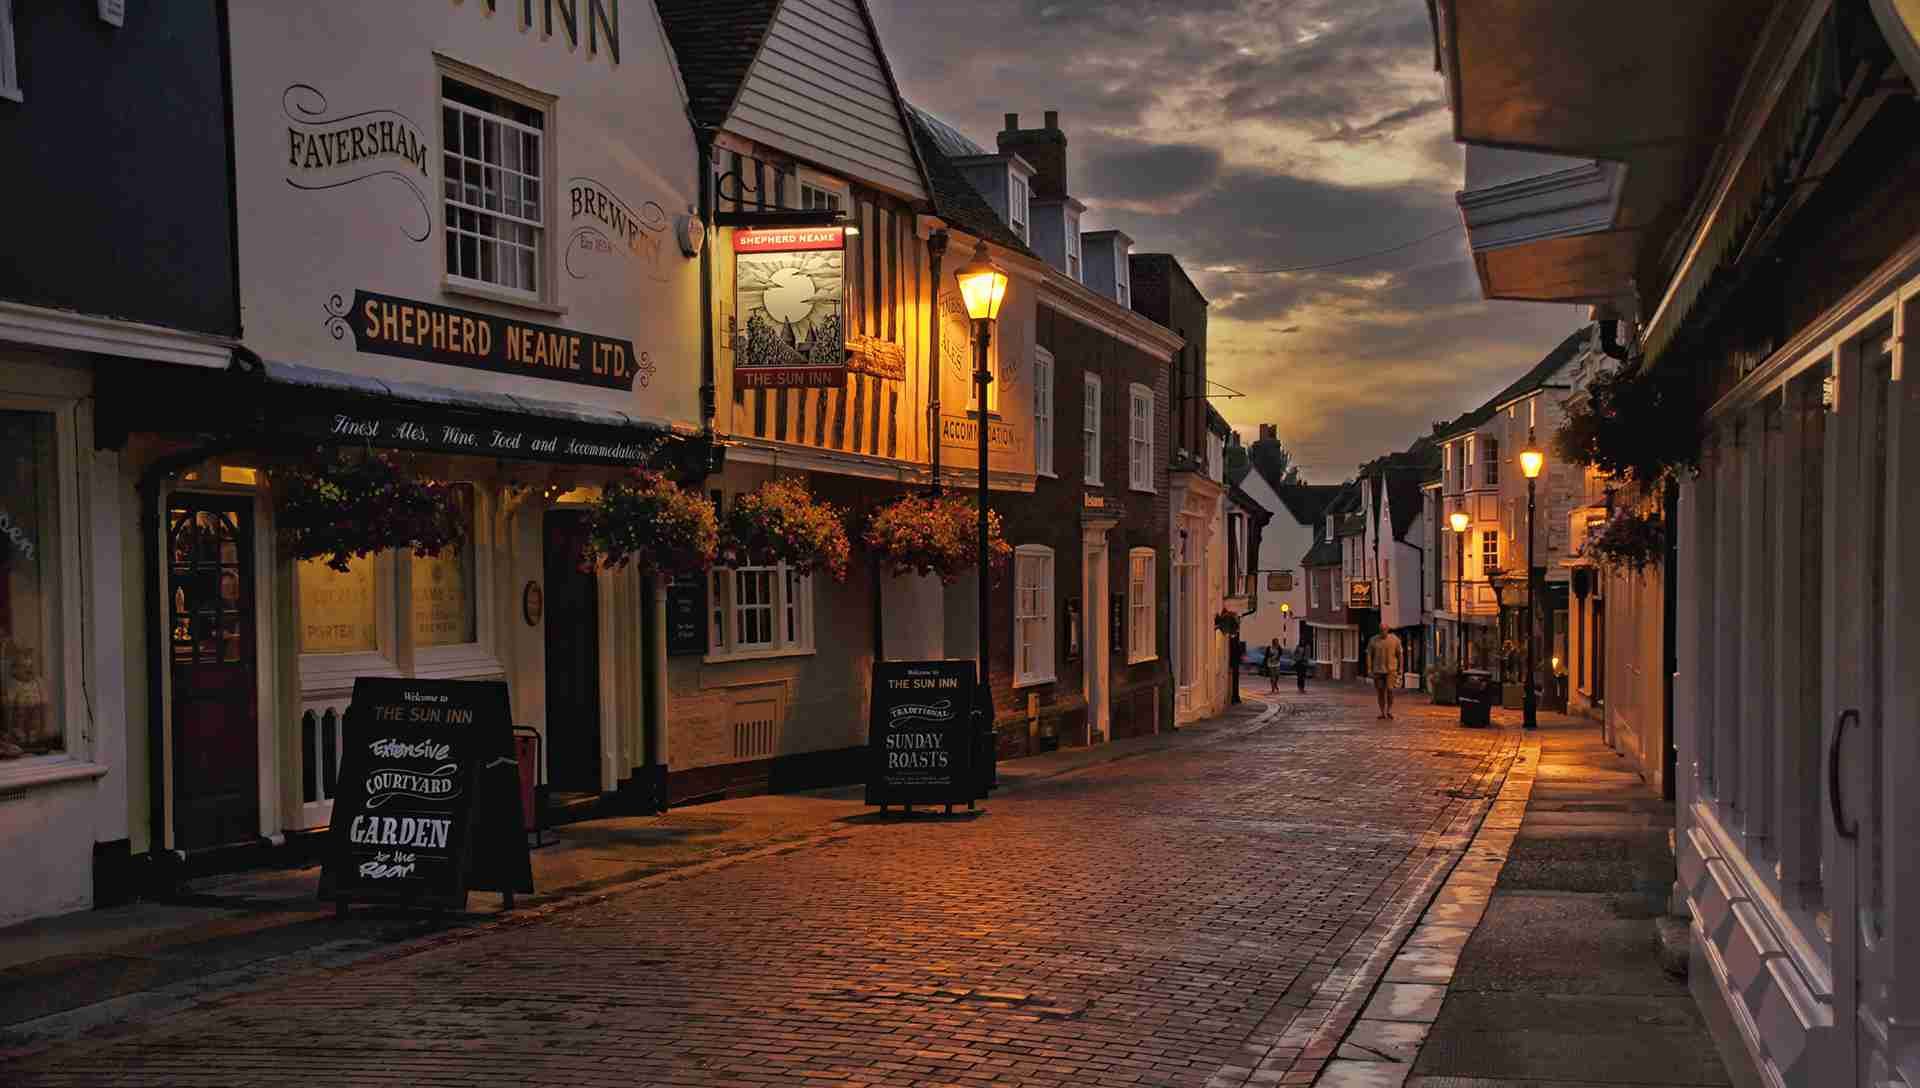 Image of the town of Faversham in the UK